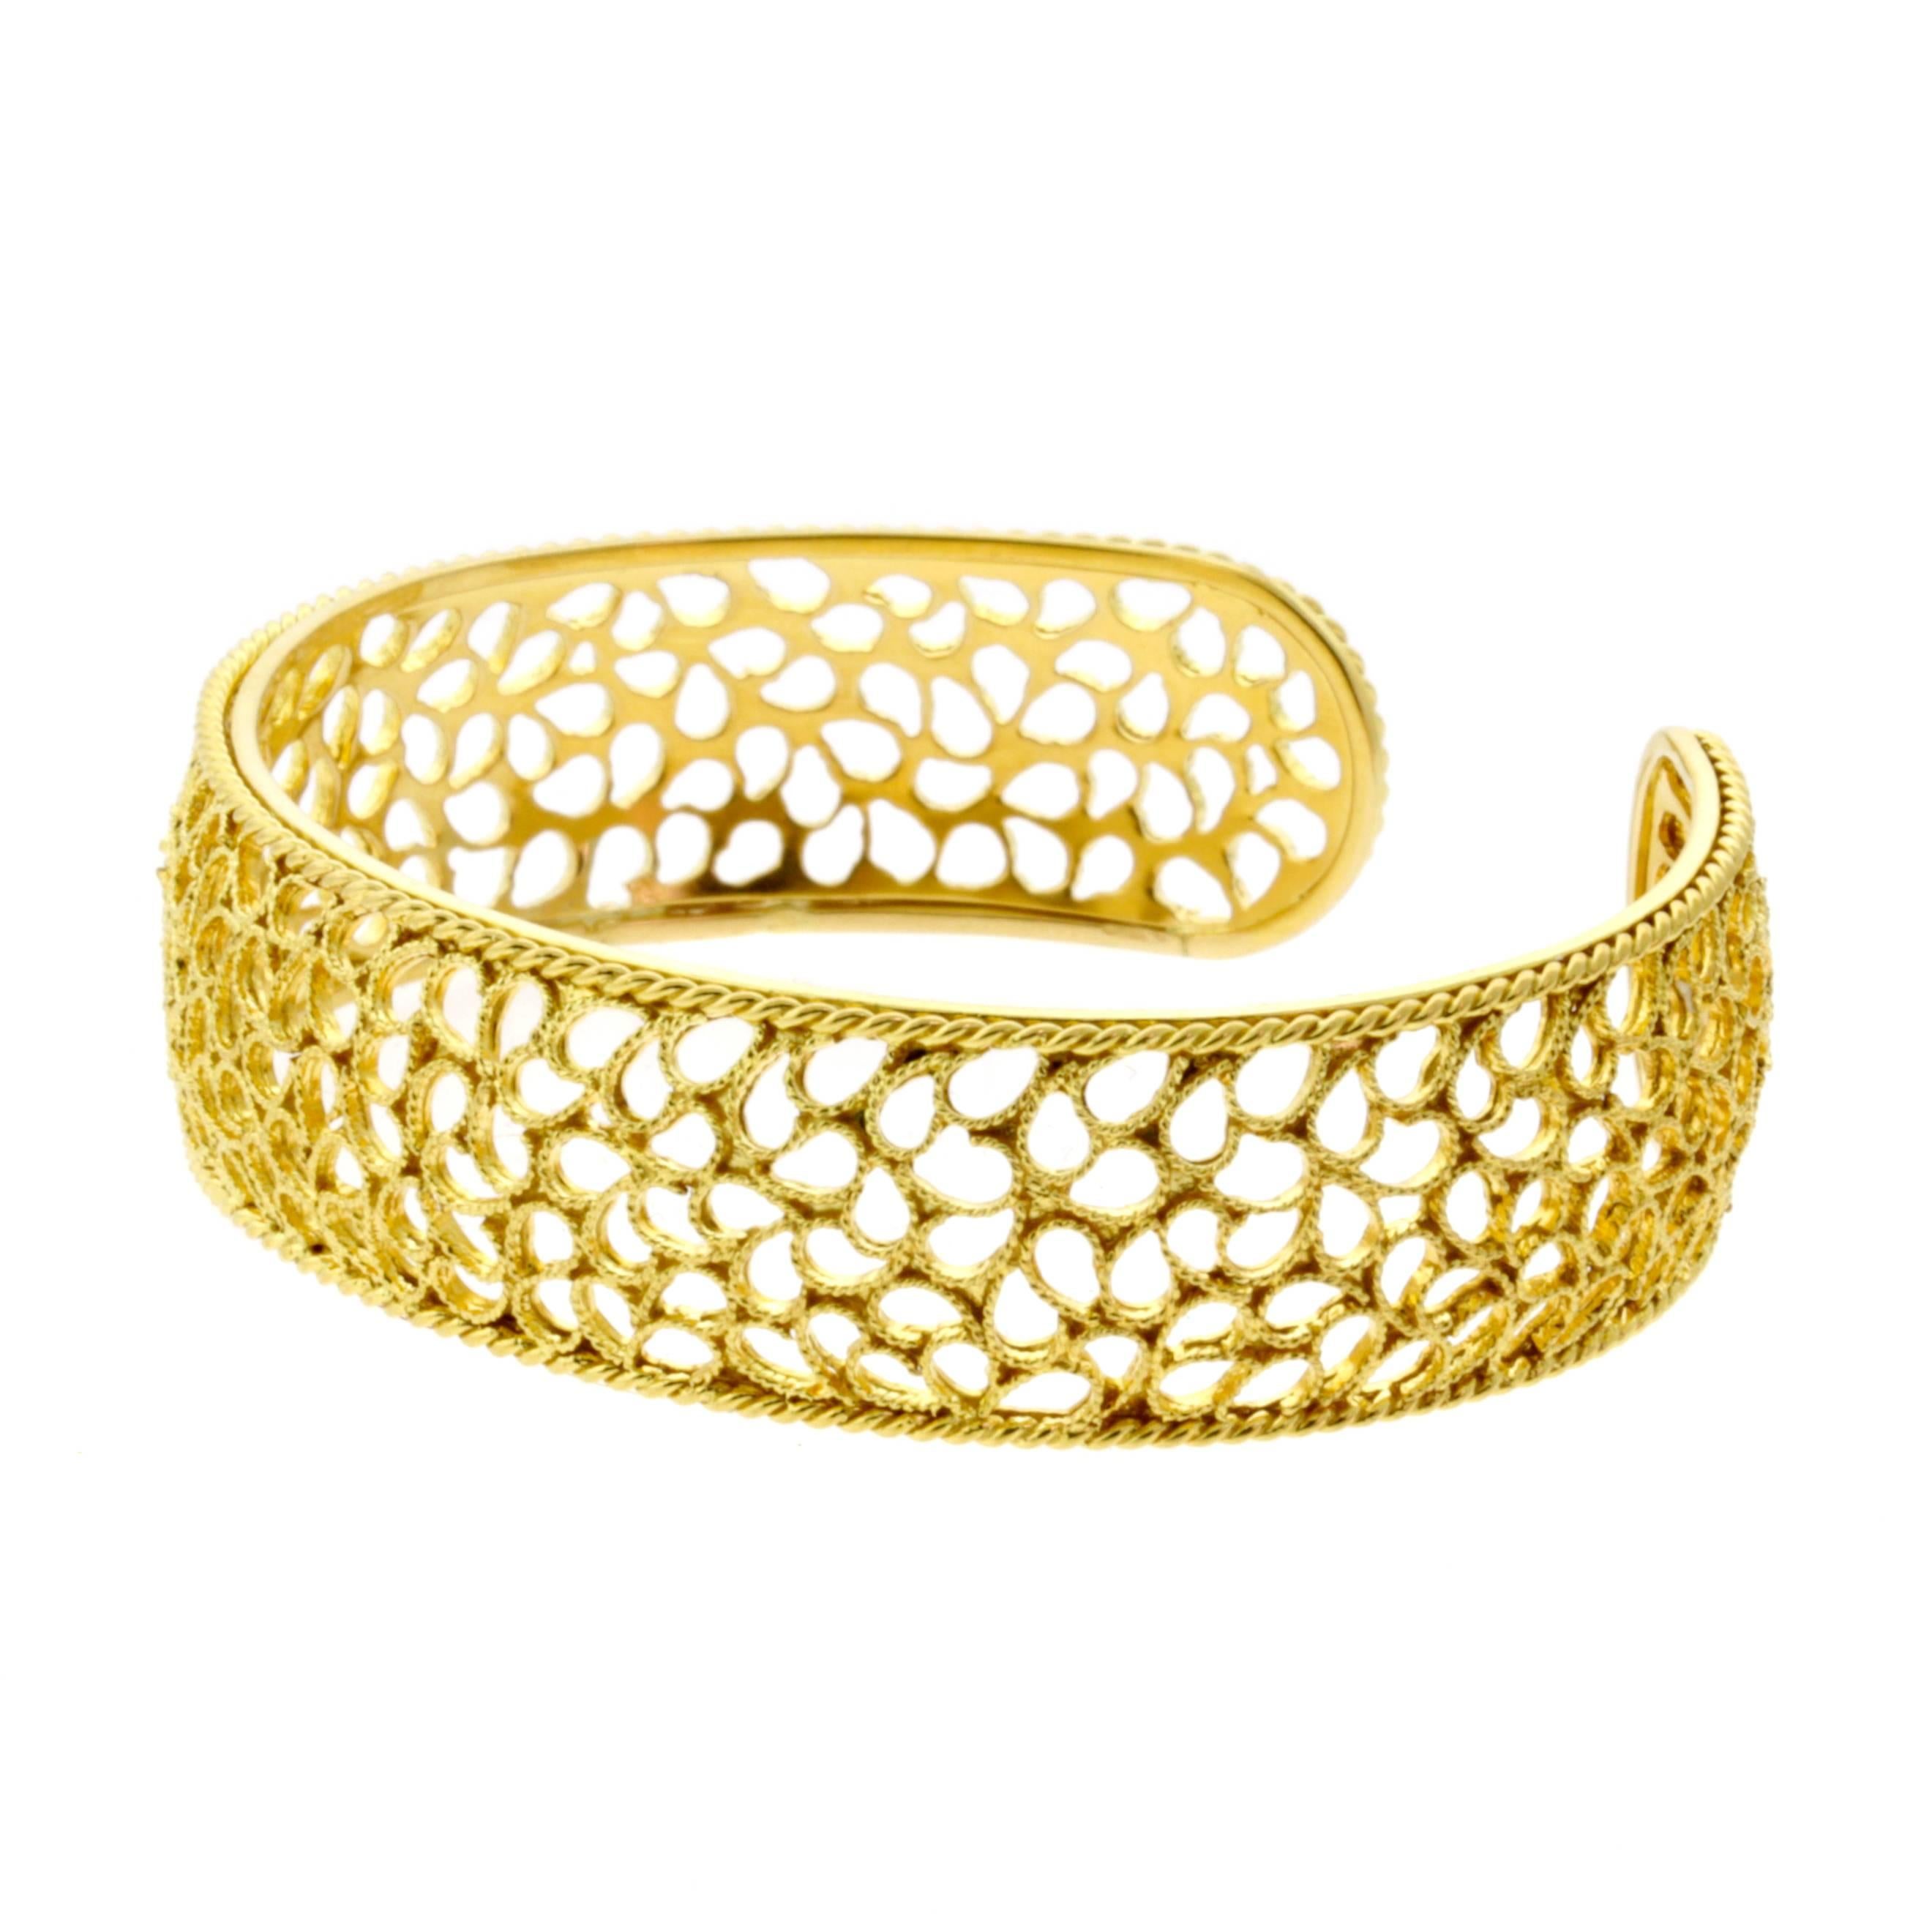 A fabulous Buccellati Cuff bracelet from the Filidoro collection consisting of 18k yellow gold. The bracelet measures .62